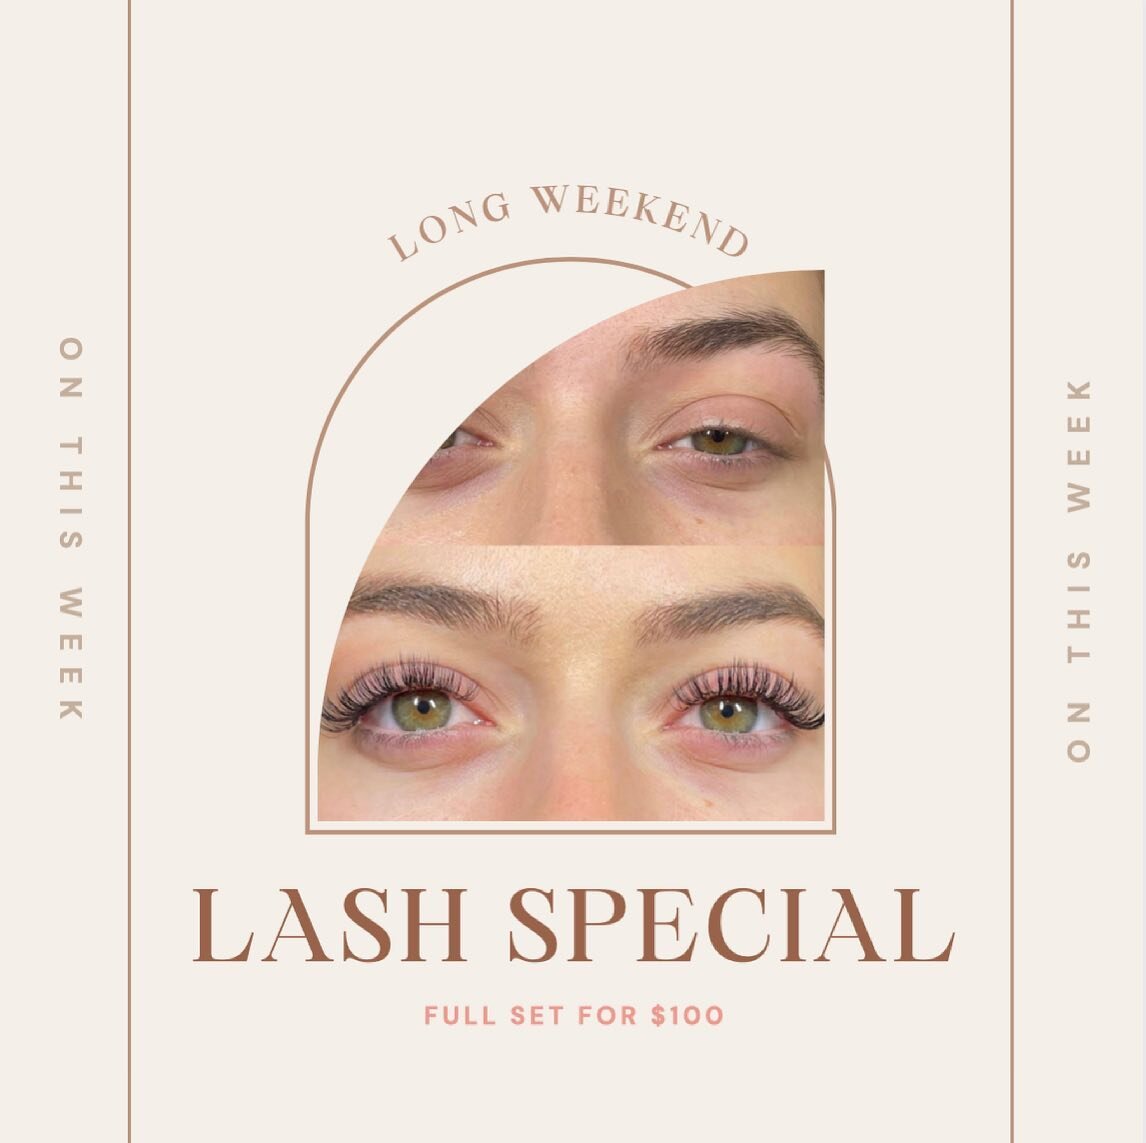 LONG WEEKEND LASH SPECIAL ✨  I thought I would offer a lash special for the week, long weekend vibes - you know? 😉  A full set of lash extensions will be $100 this week!  Book your appointment today to secure this special. You can book for any time 